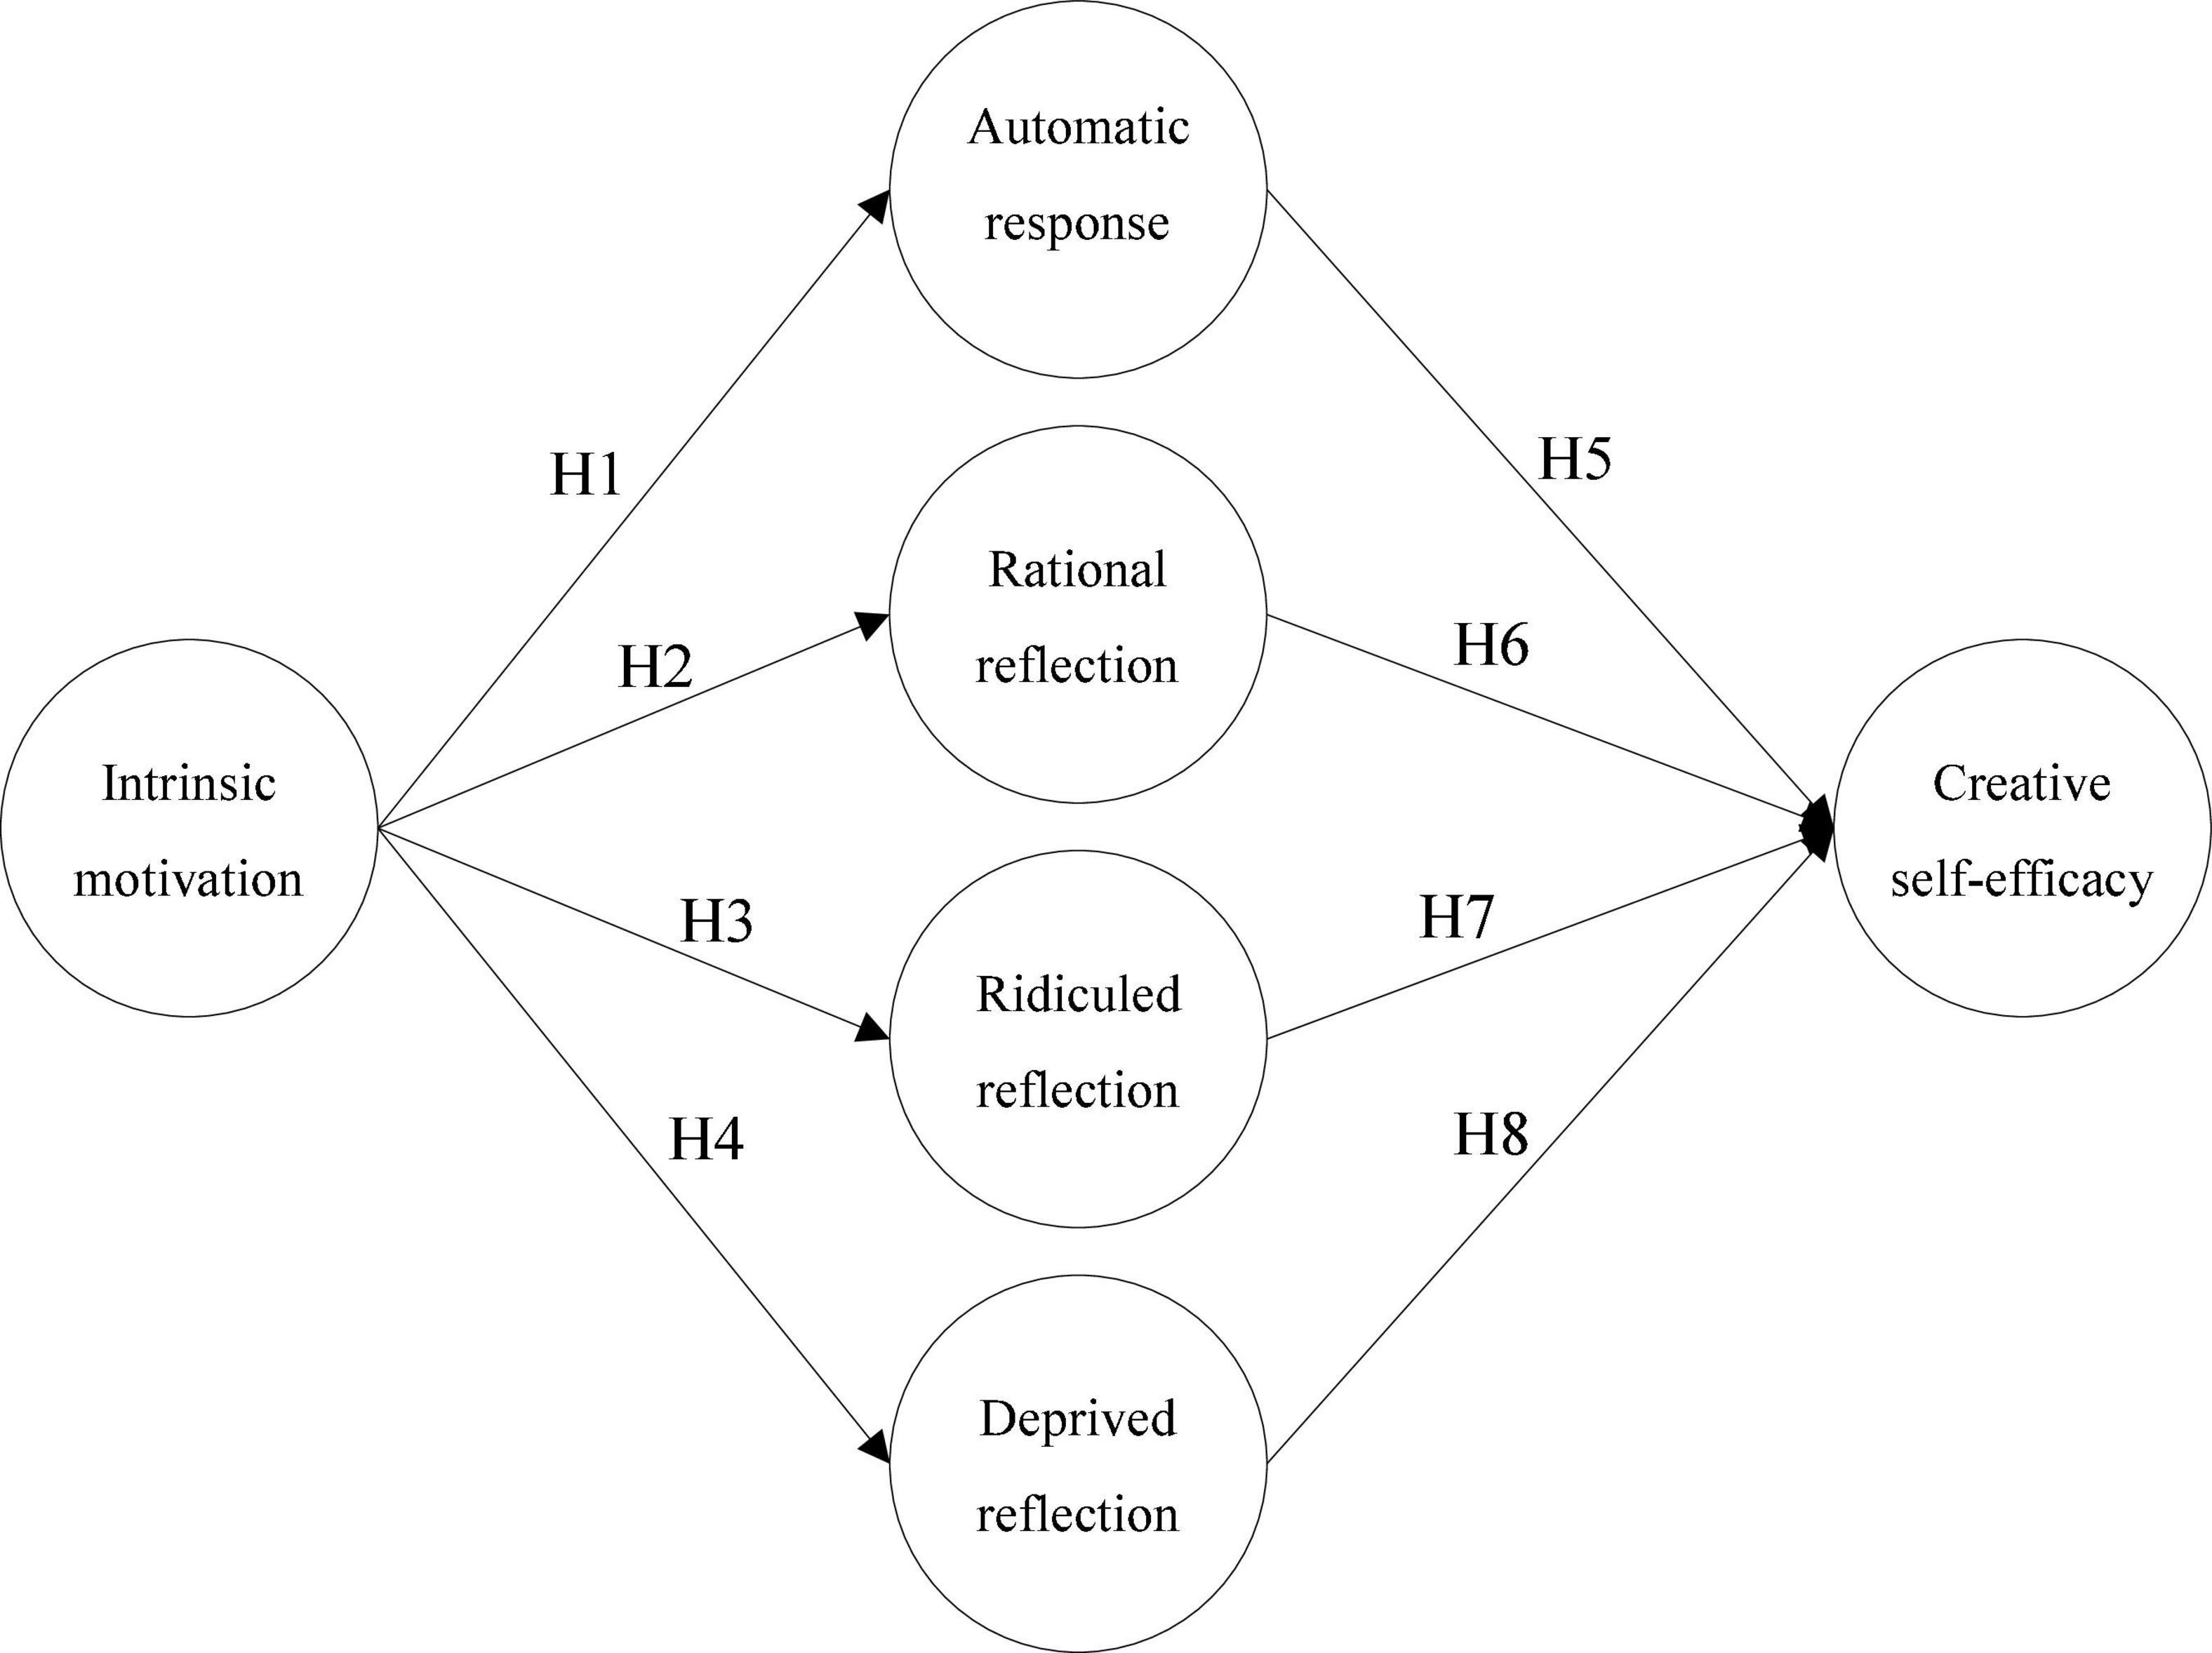 Academic Research] The Relationship between Motivations for